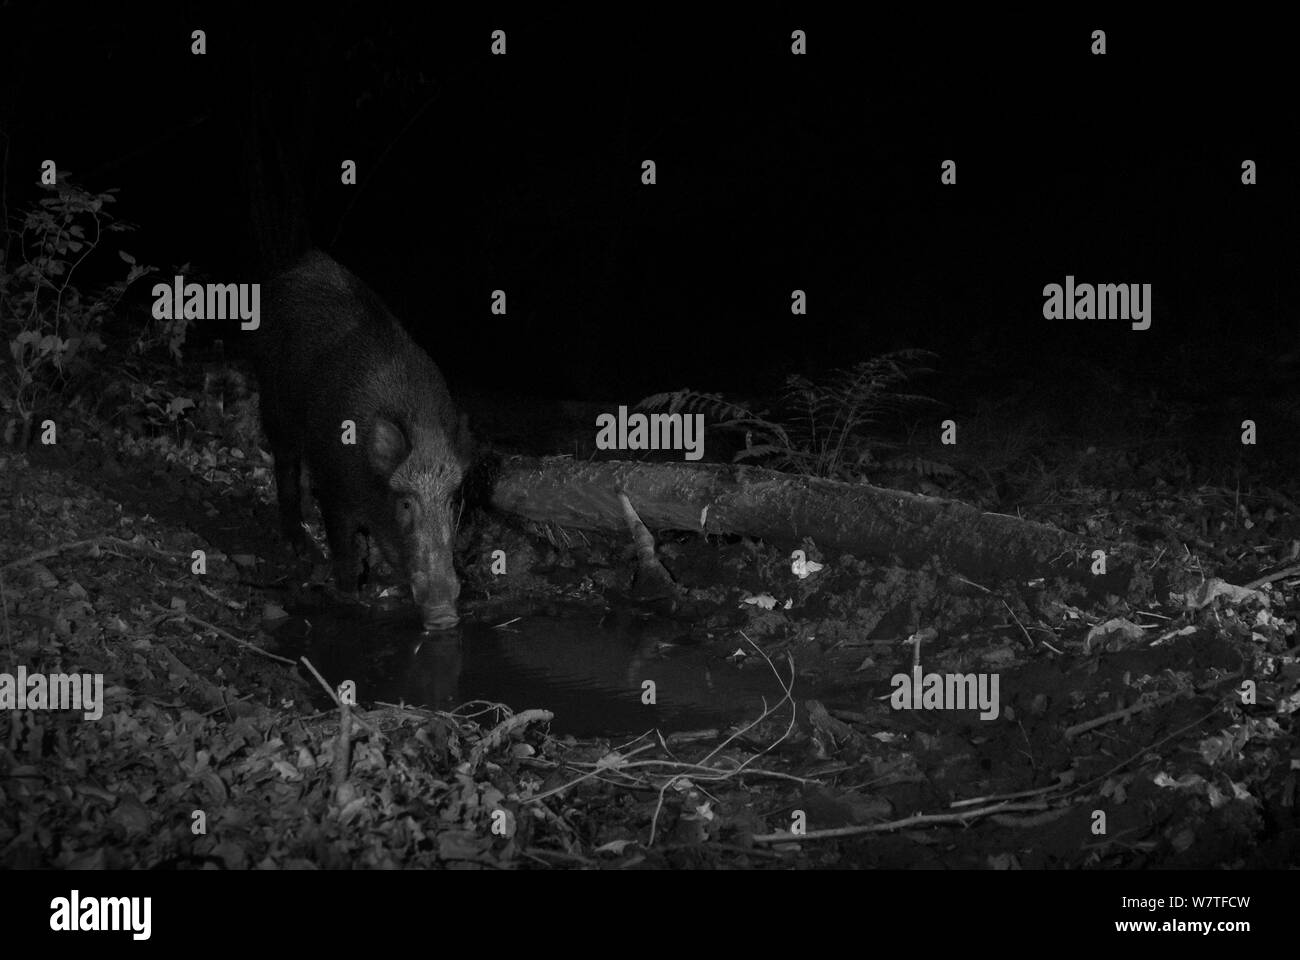 Wild Boar (Sus scrofa) taken at night with infra red remote camera trap, Mayenne, Pays de Loire, France. Stock Photo